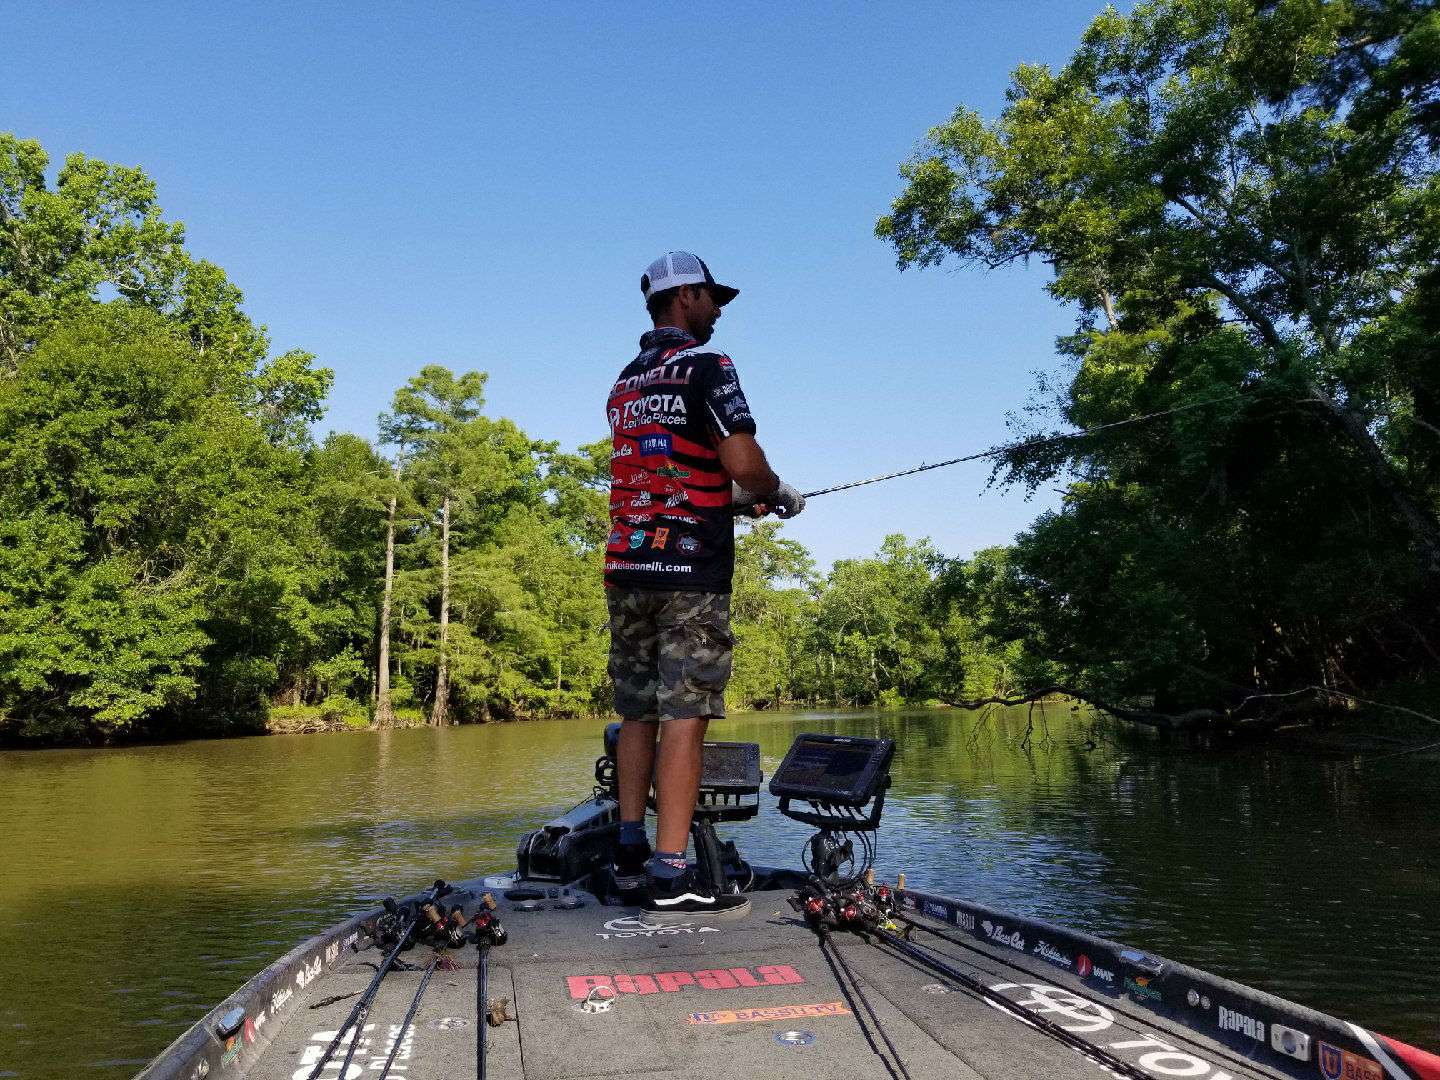 Mike Iaconelli filled a limit quickly this morning. Looking to cull up now.